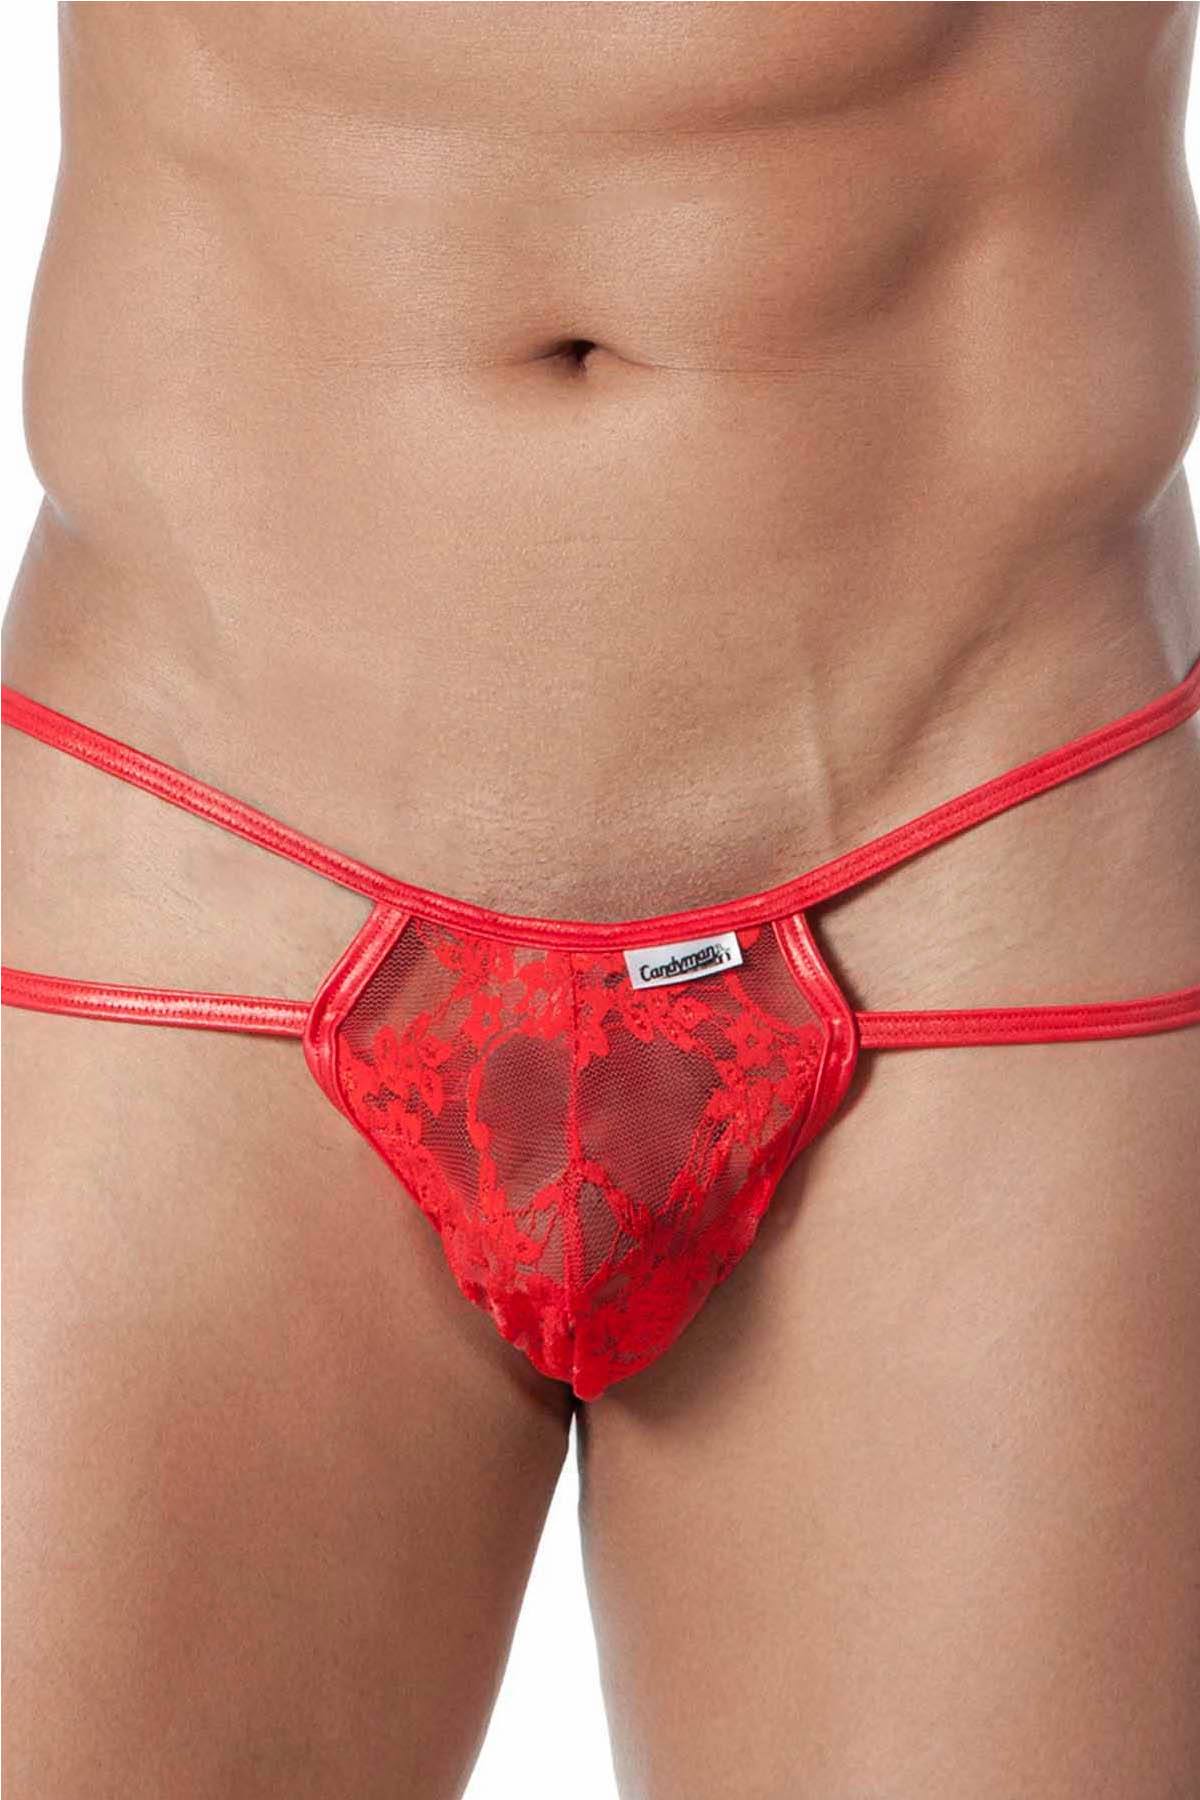 Candyman Red Lace Strappy Thong